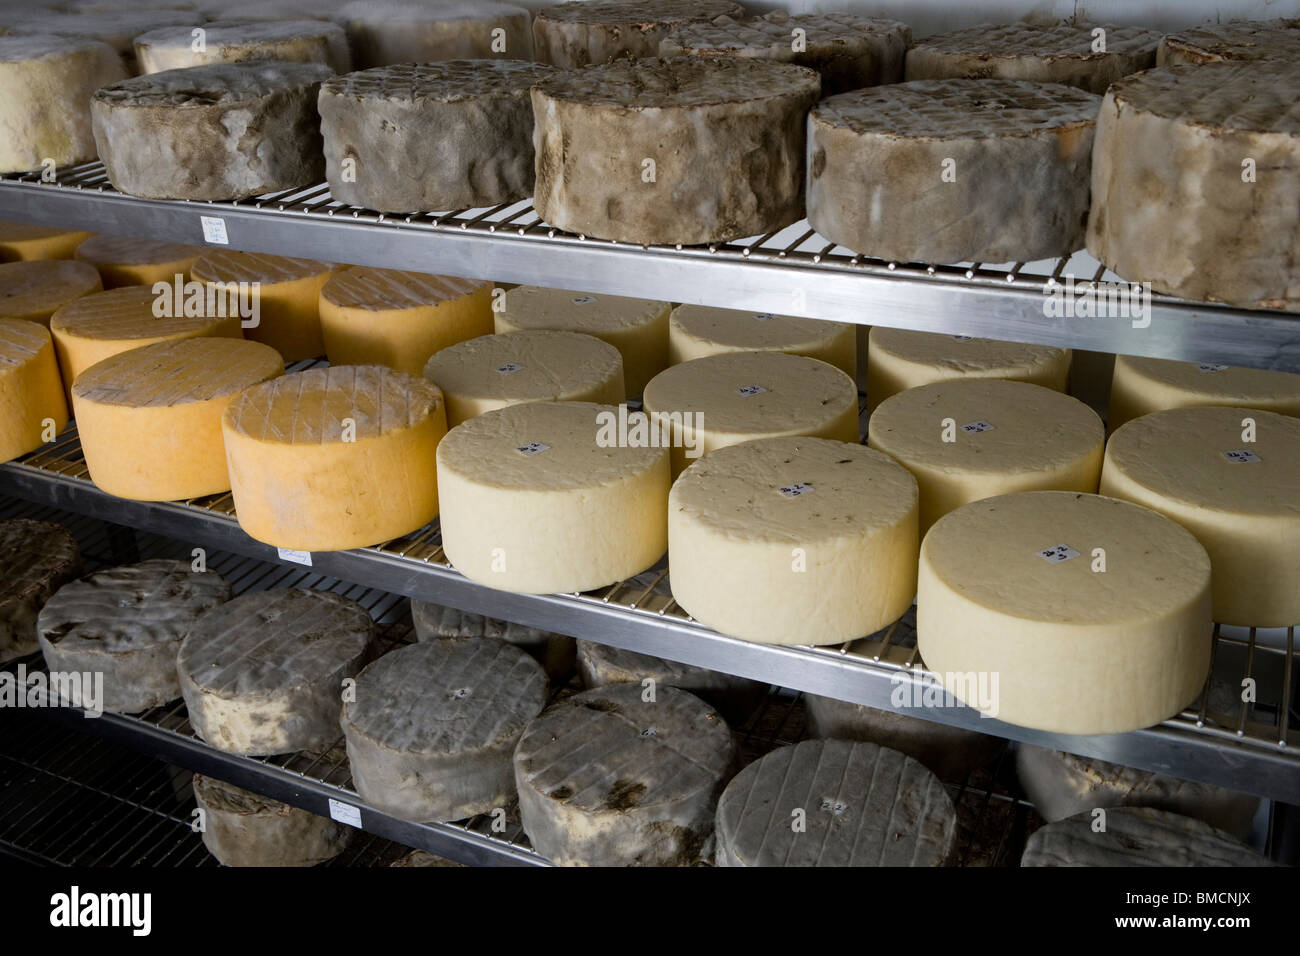 https://c8.alamy.com/comp/BMCNJX/handmade-single-and-double-gloucester-cheeses-in-a-cold-store-room-BMCNJX.jpg